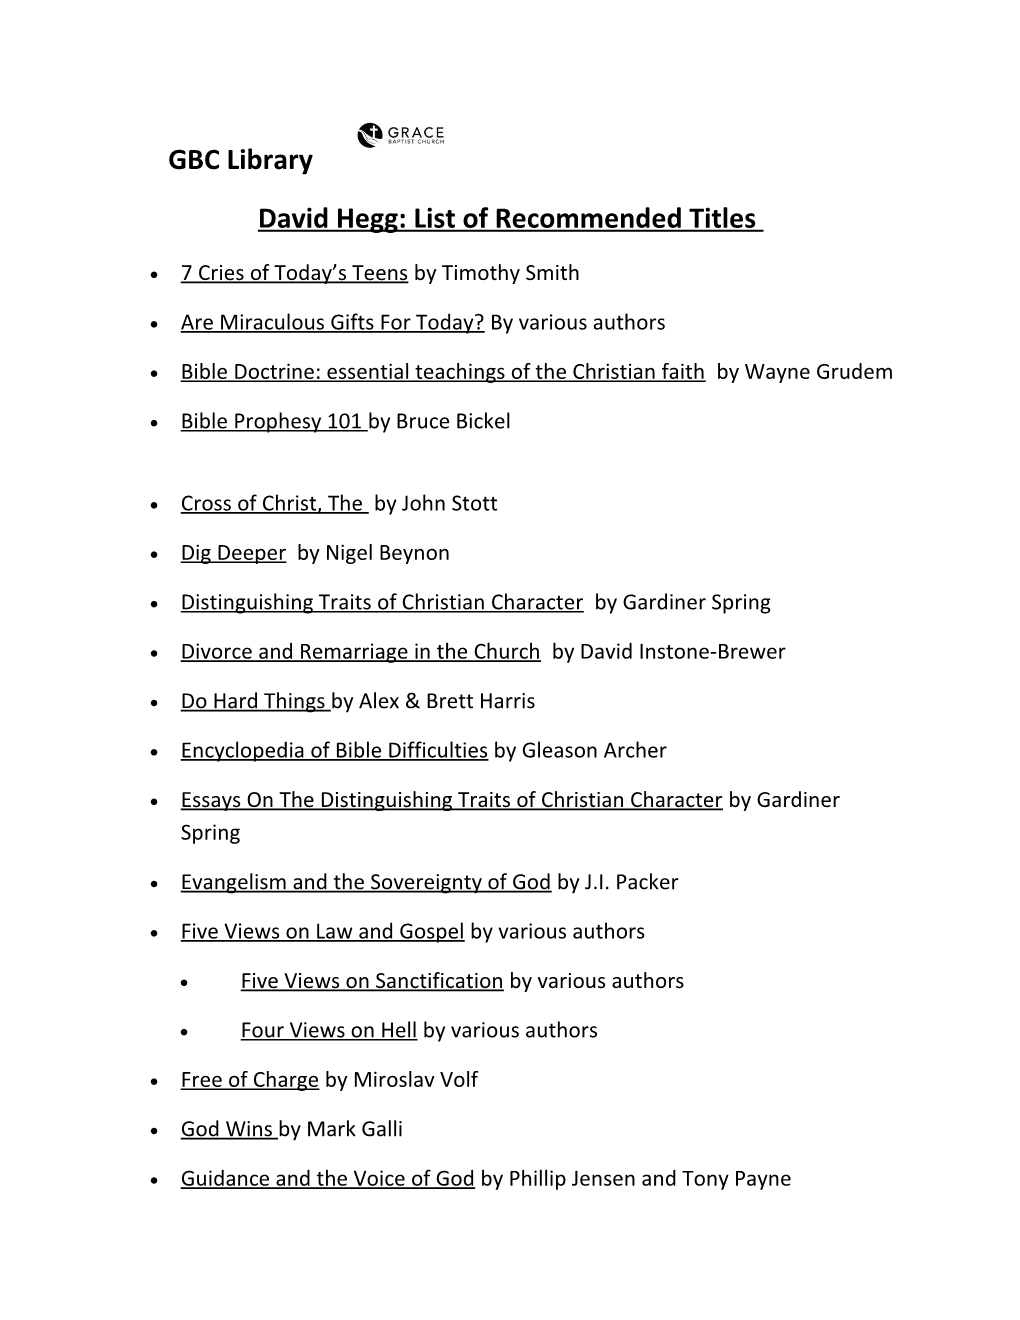 David Hegg: List of Recommended Titles